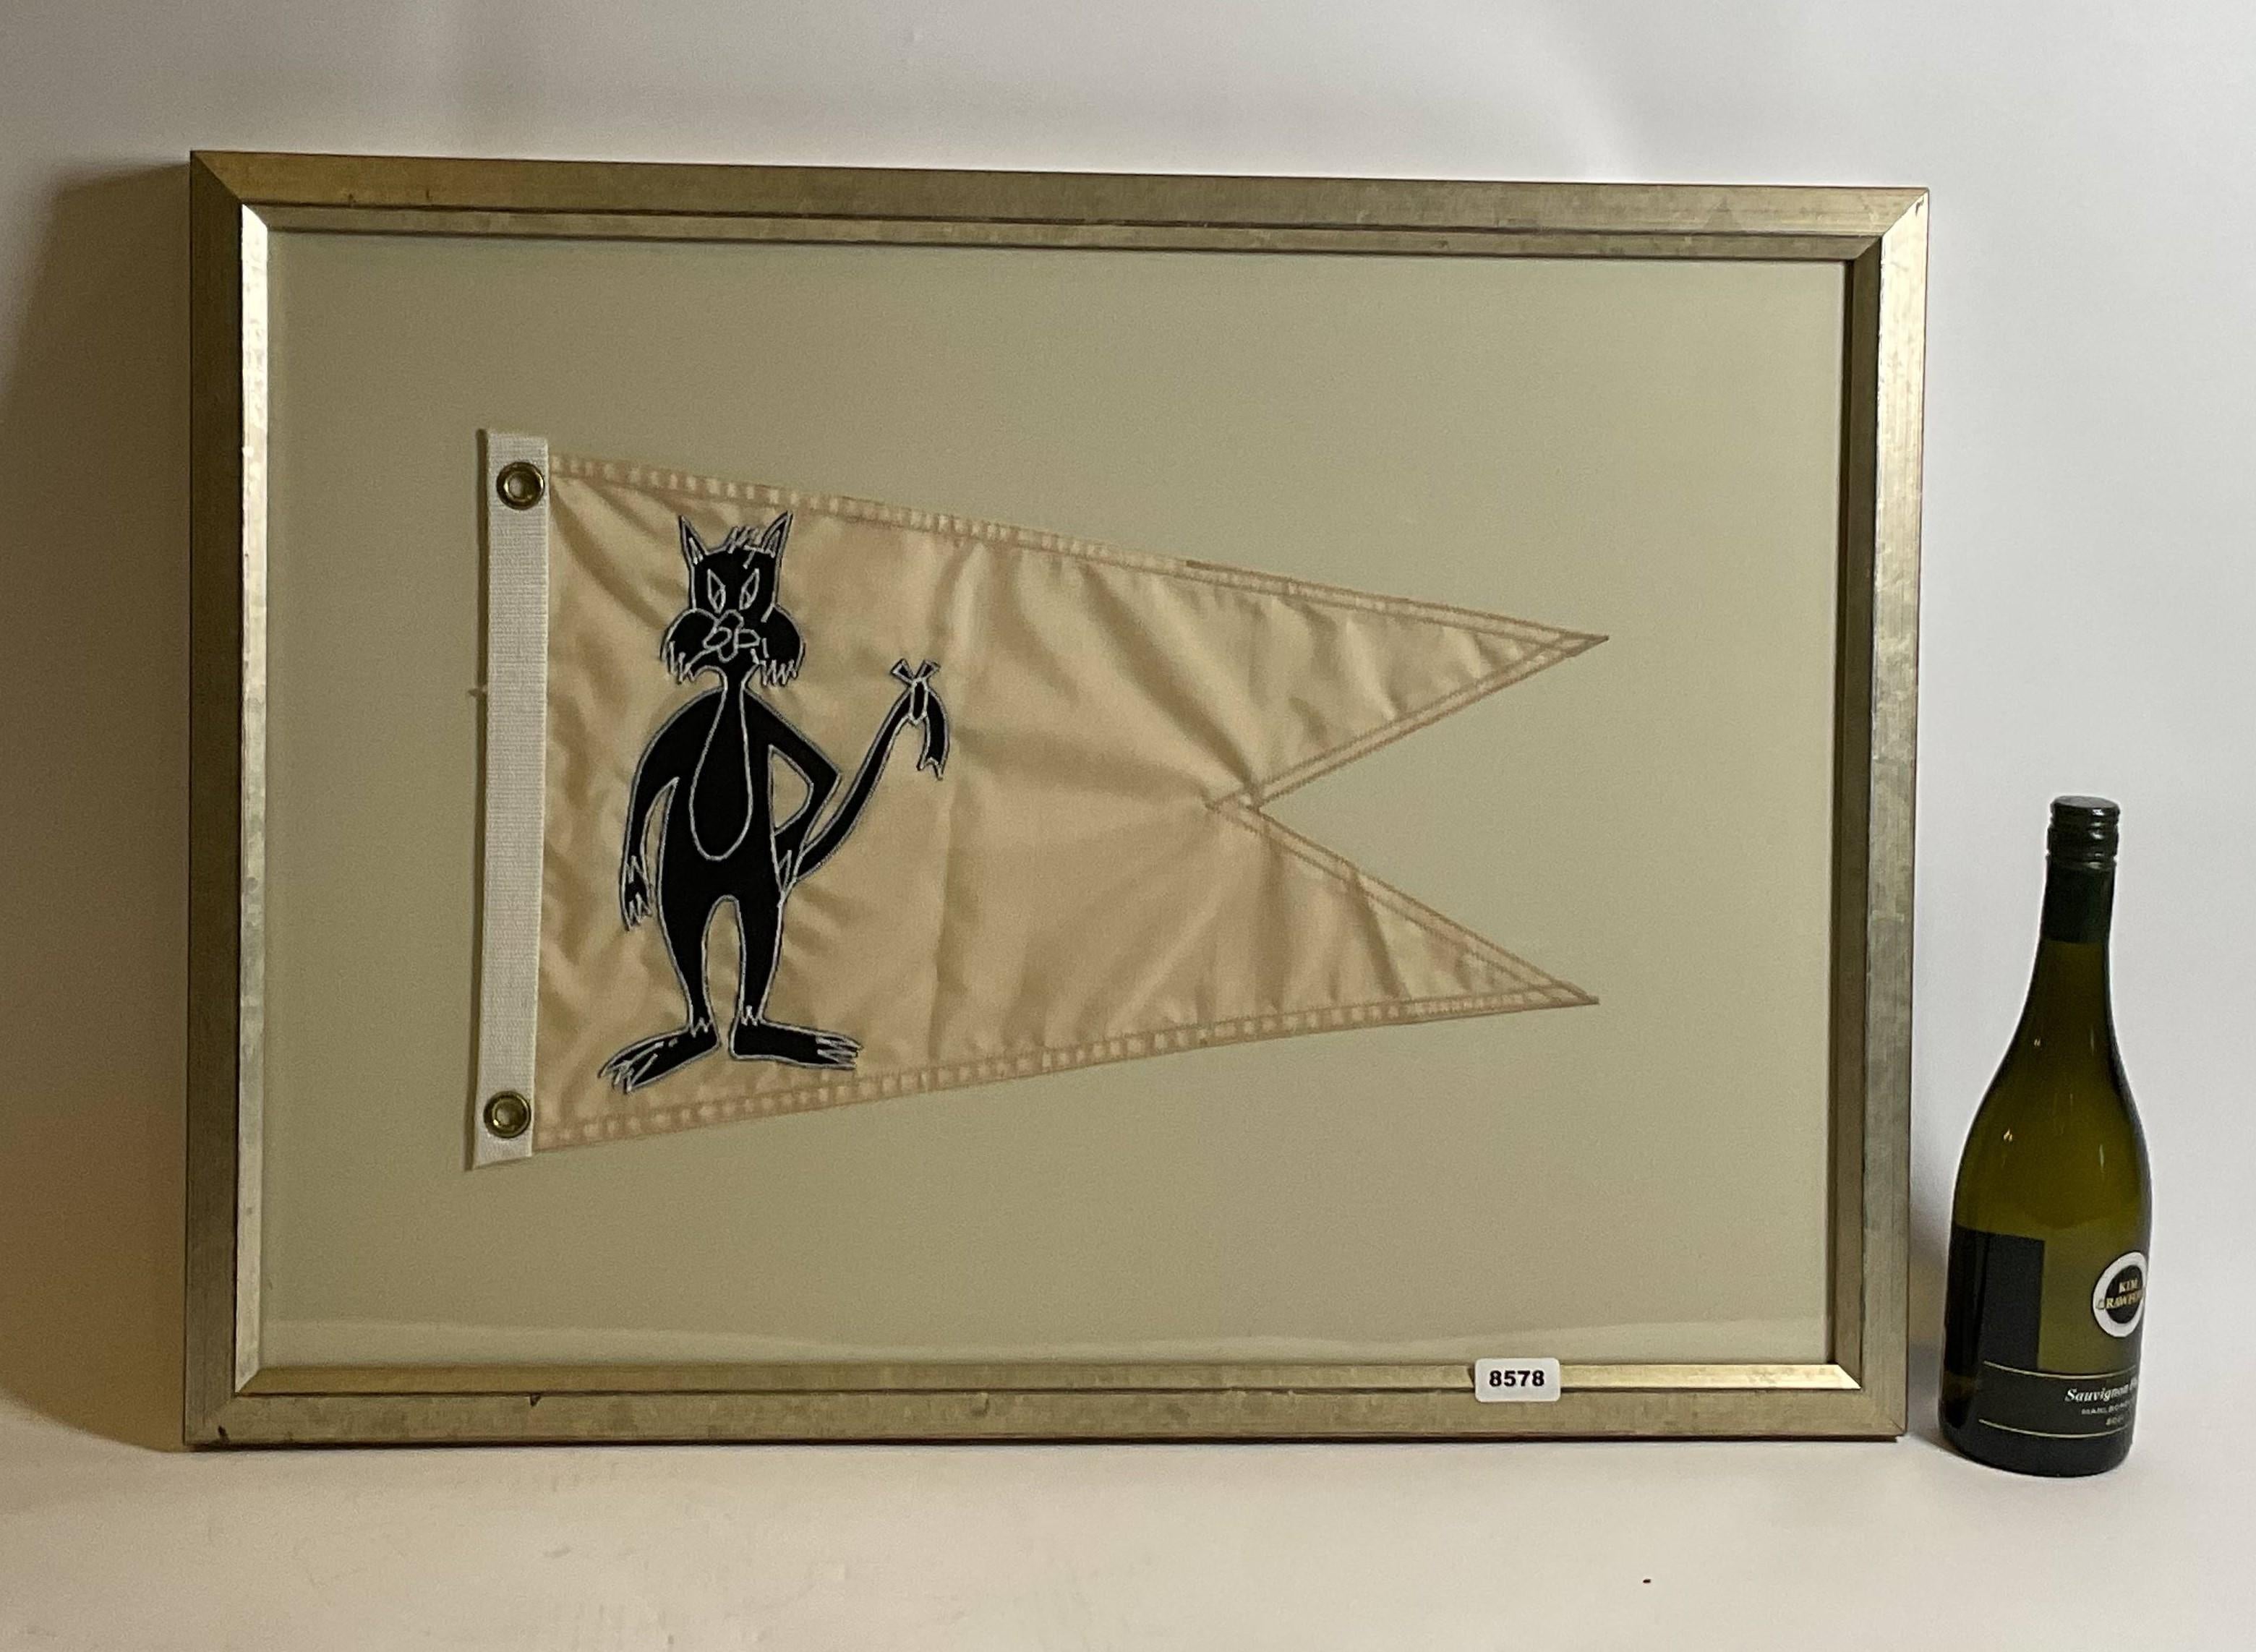 Nautical burgee flag showing Sylvester the cat. Swallowtail flag with a strong hoist and brass grommets. Custom frame. 

Weight: 9 lbs.
Overall Dimensions: 22